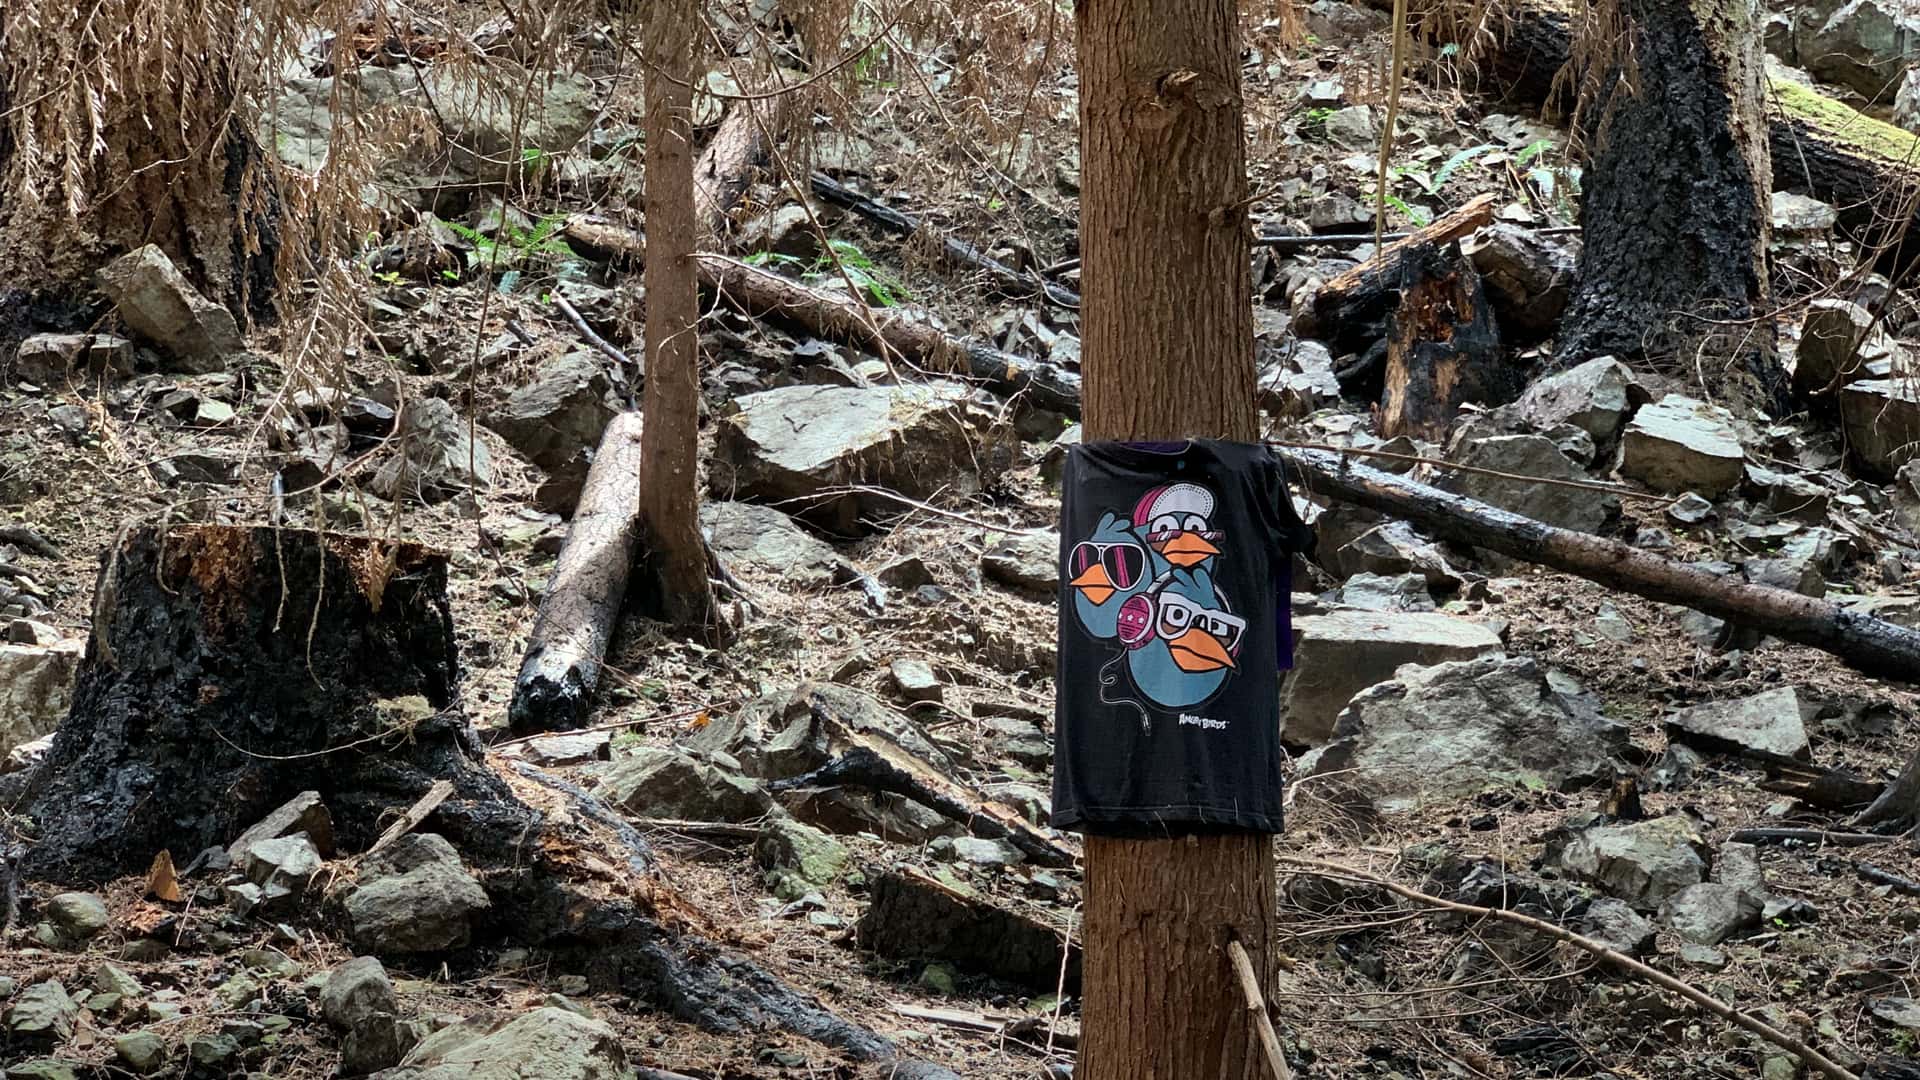 Angry Birds t-shirt posted like a sign in the aftermath of a forest fire